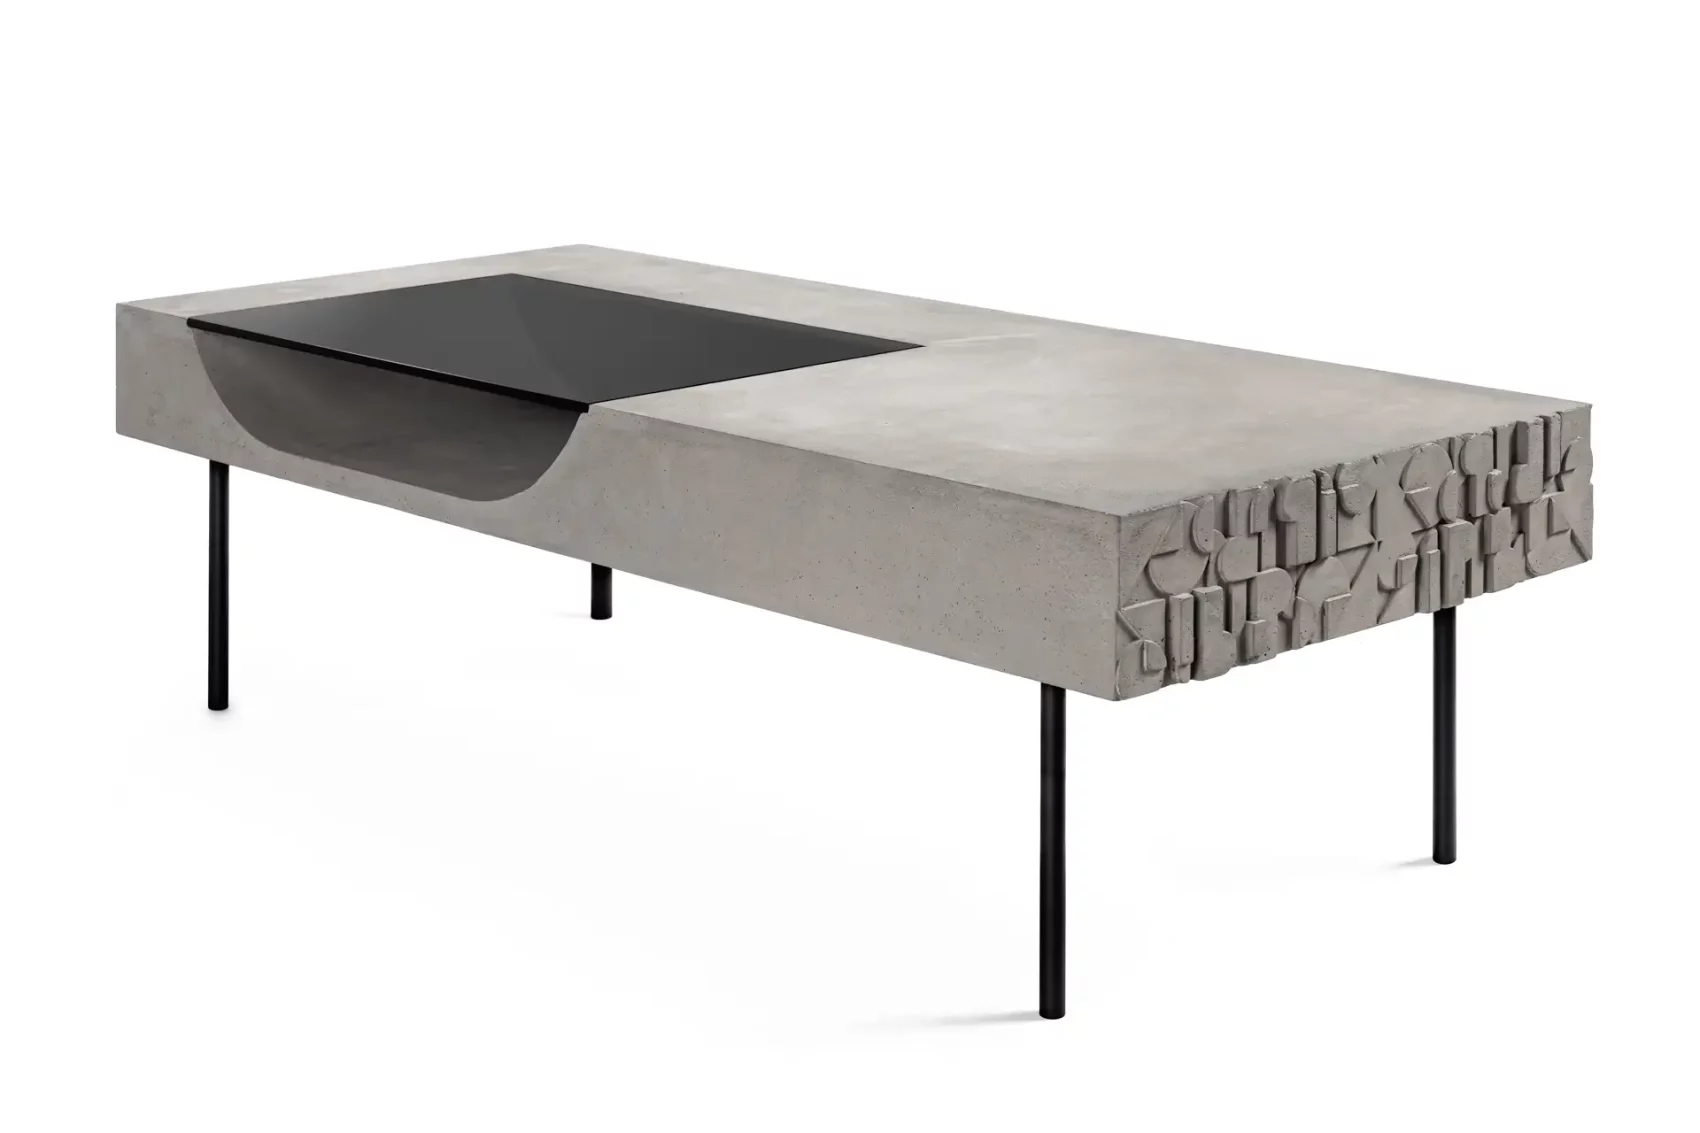 Concrete coffee table with glass tray inspired by the Bauhaus school